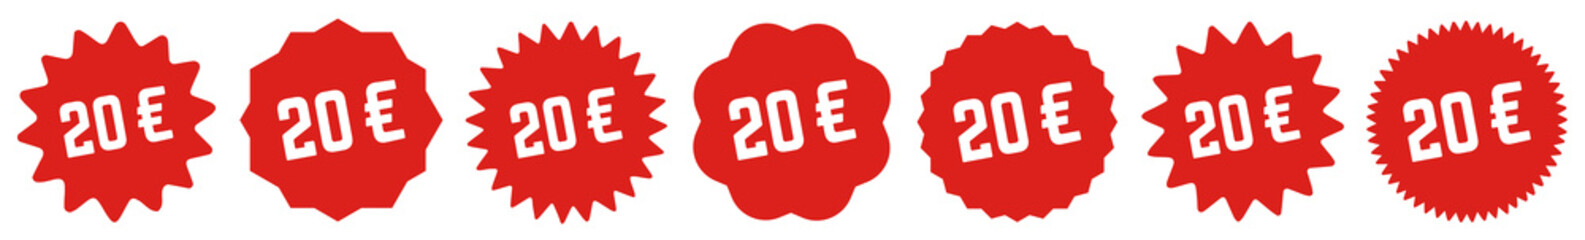 Wall Mural - 20 Price Tag Red | 20 Euro | Special Offer Icon | Sale Sticker | Deal Label | Variations